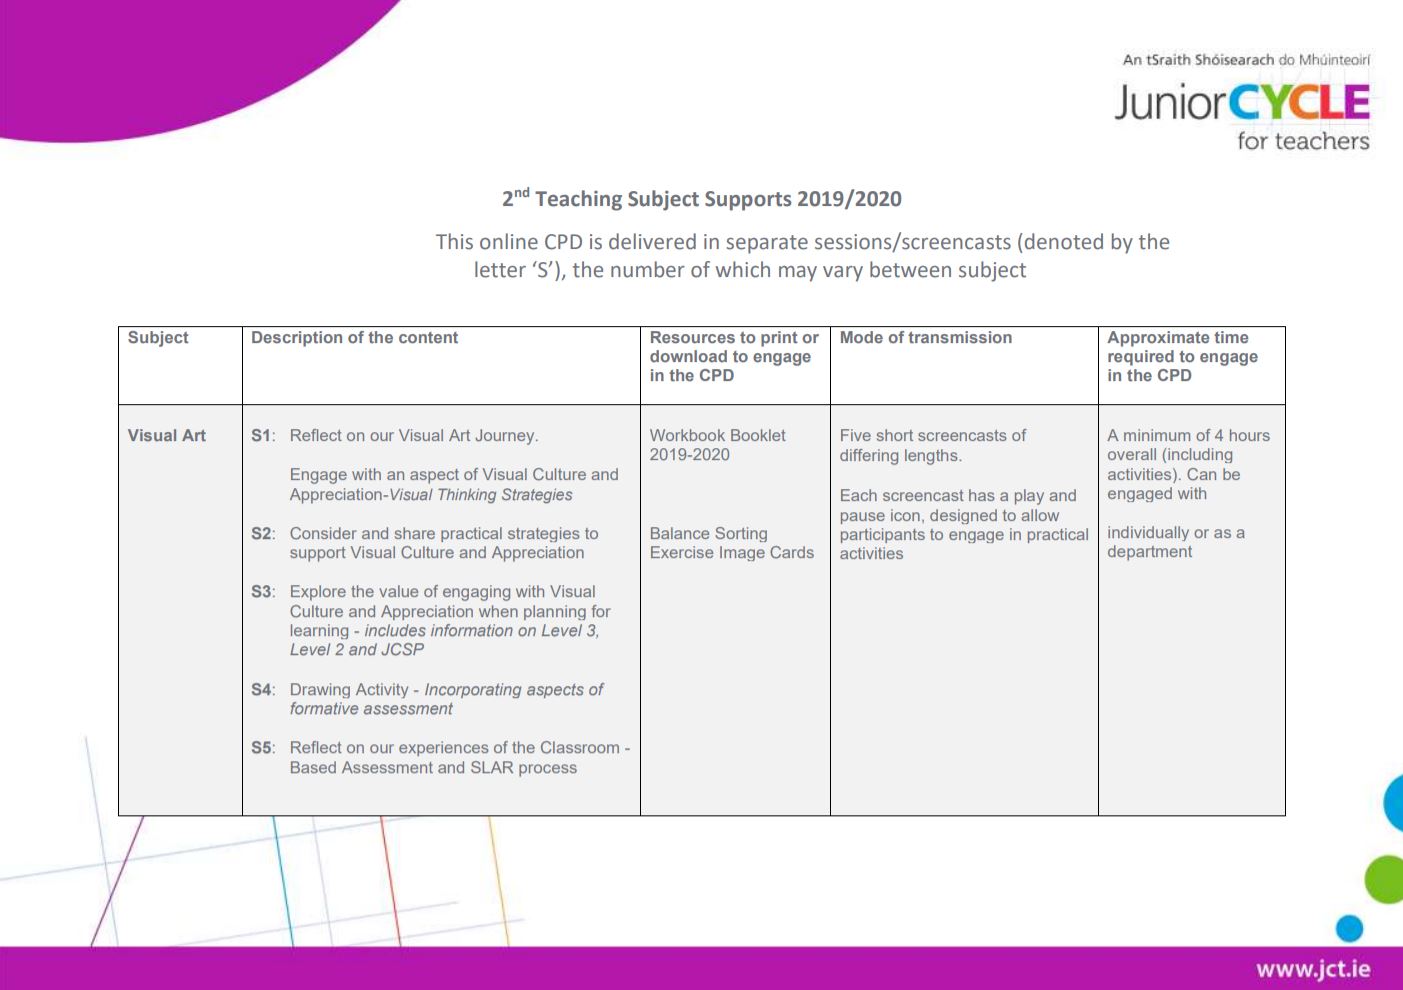 Overview Of Second Subject teaching Supports